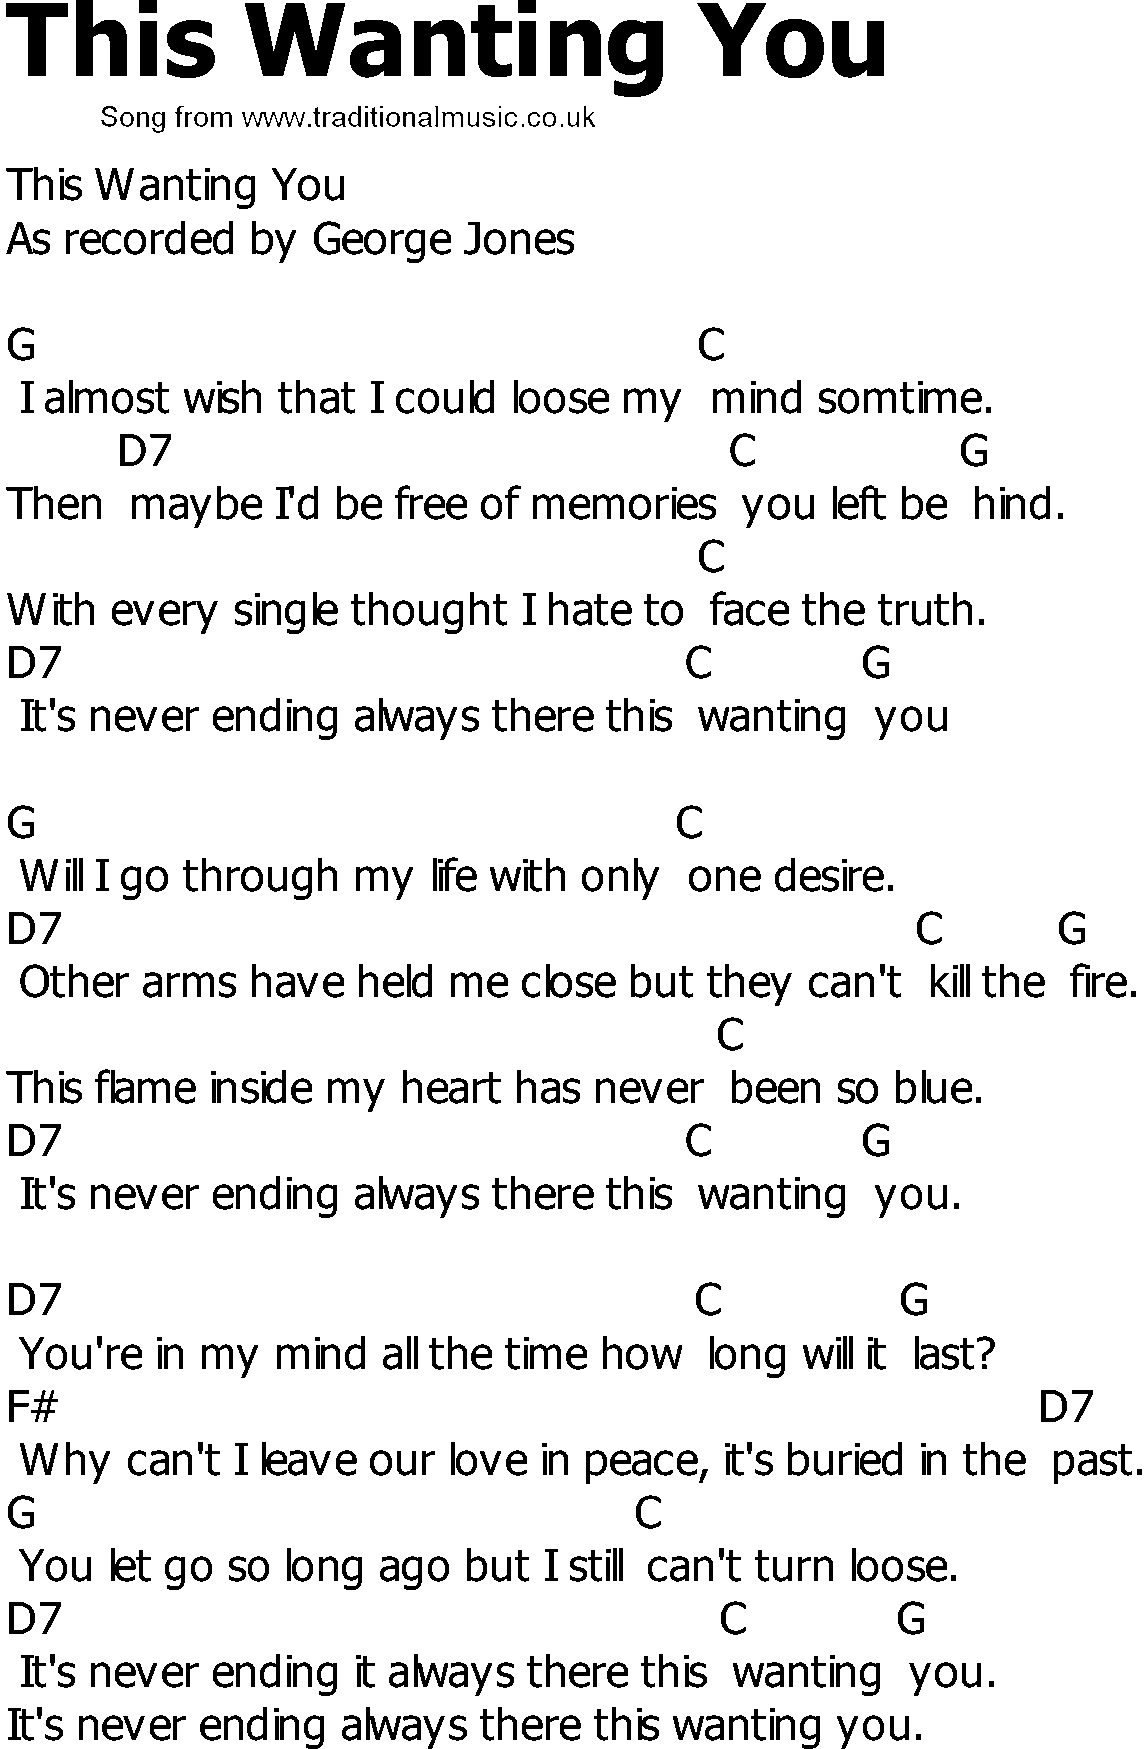 Old Country song lyrics with chords - This Wanting You